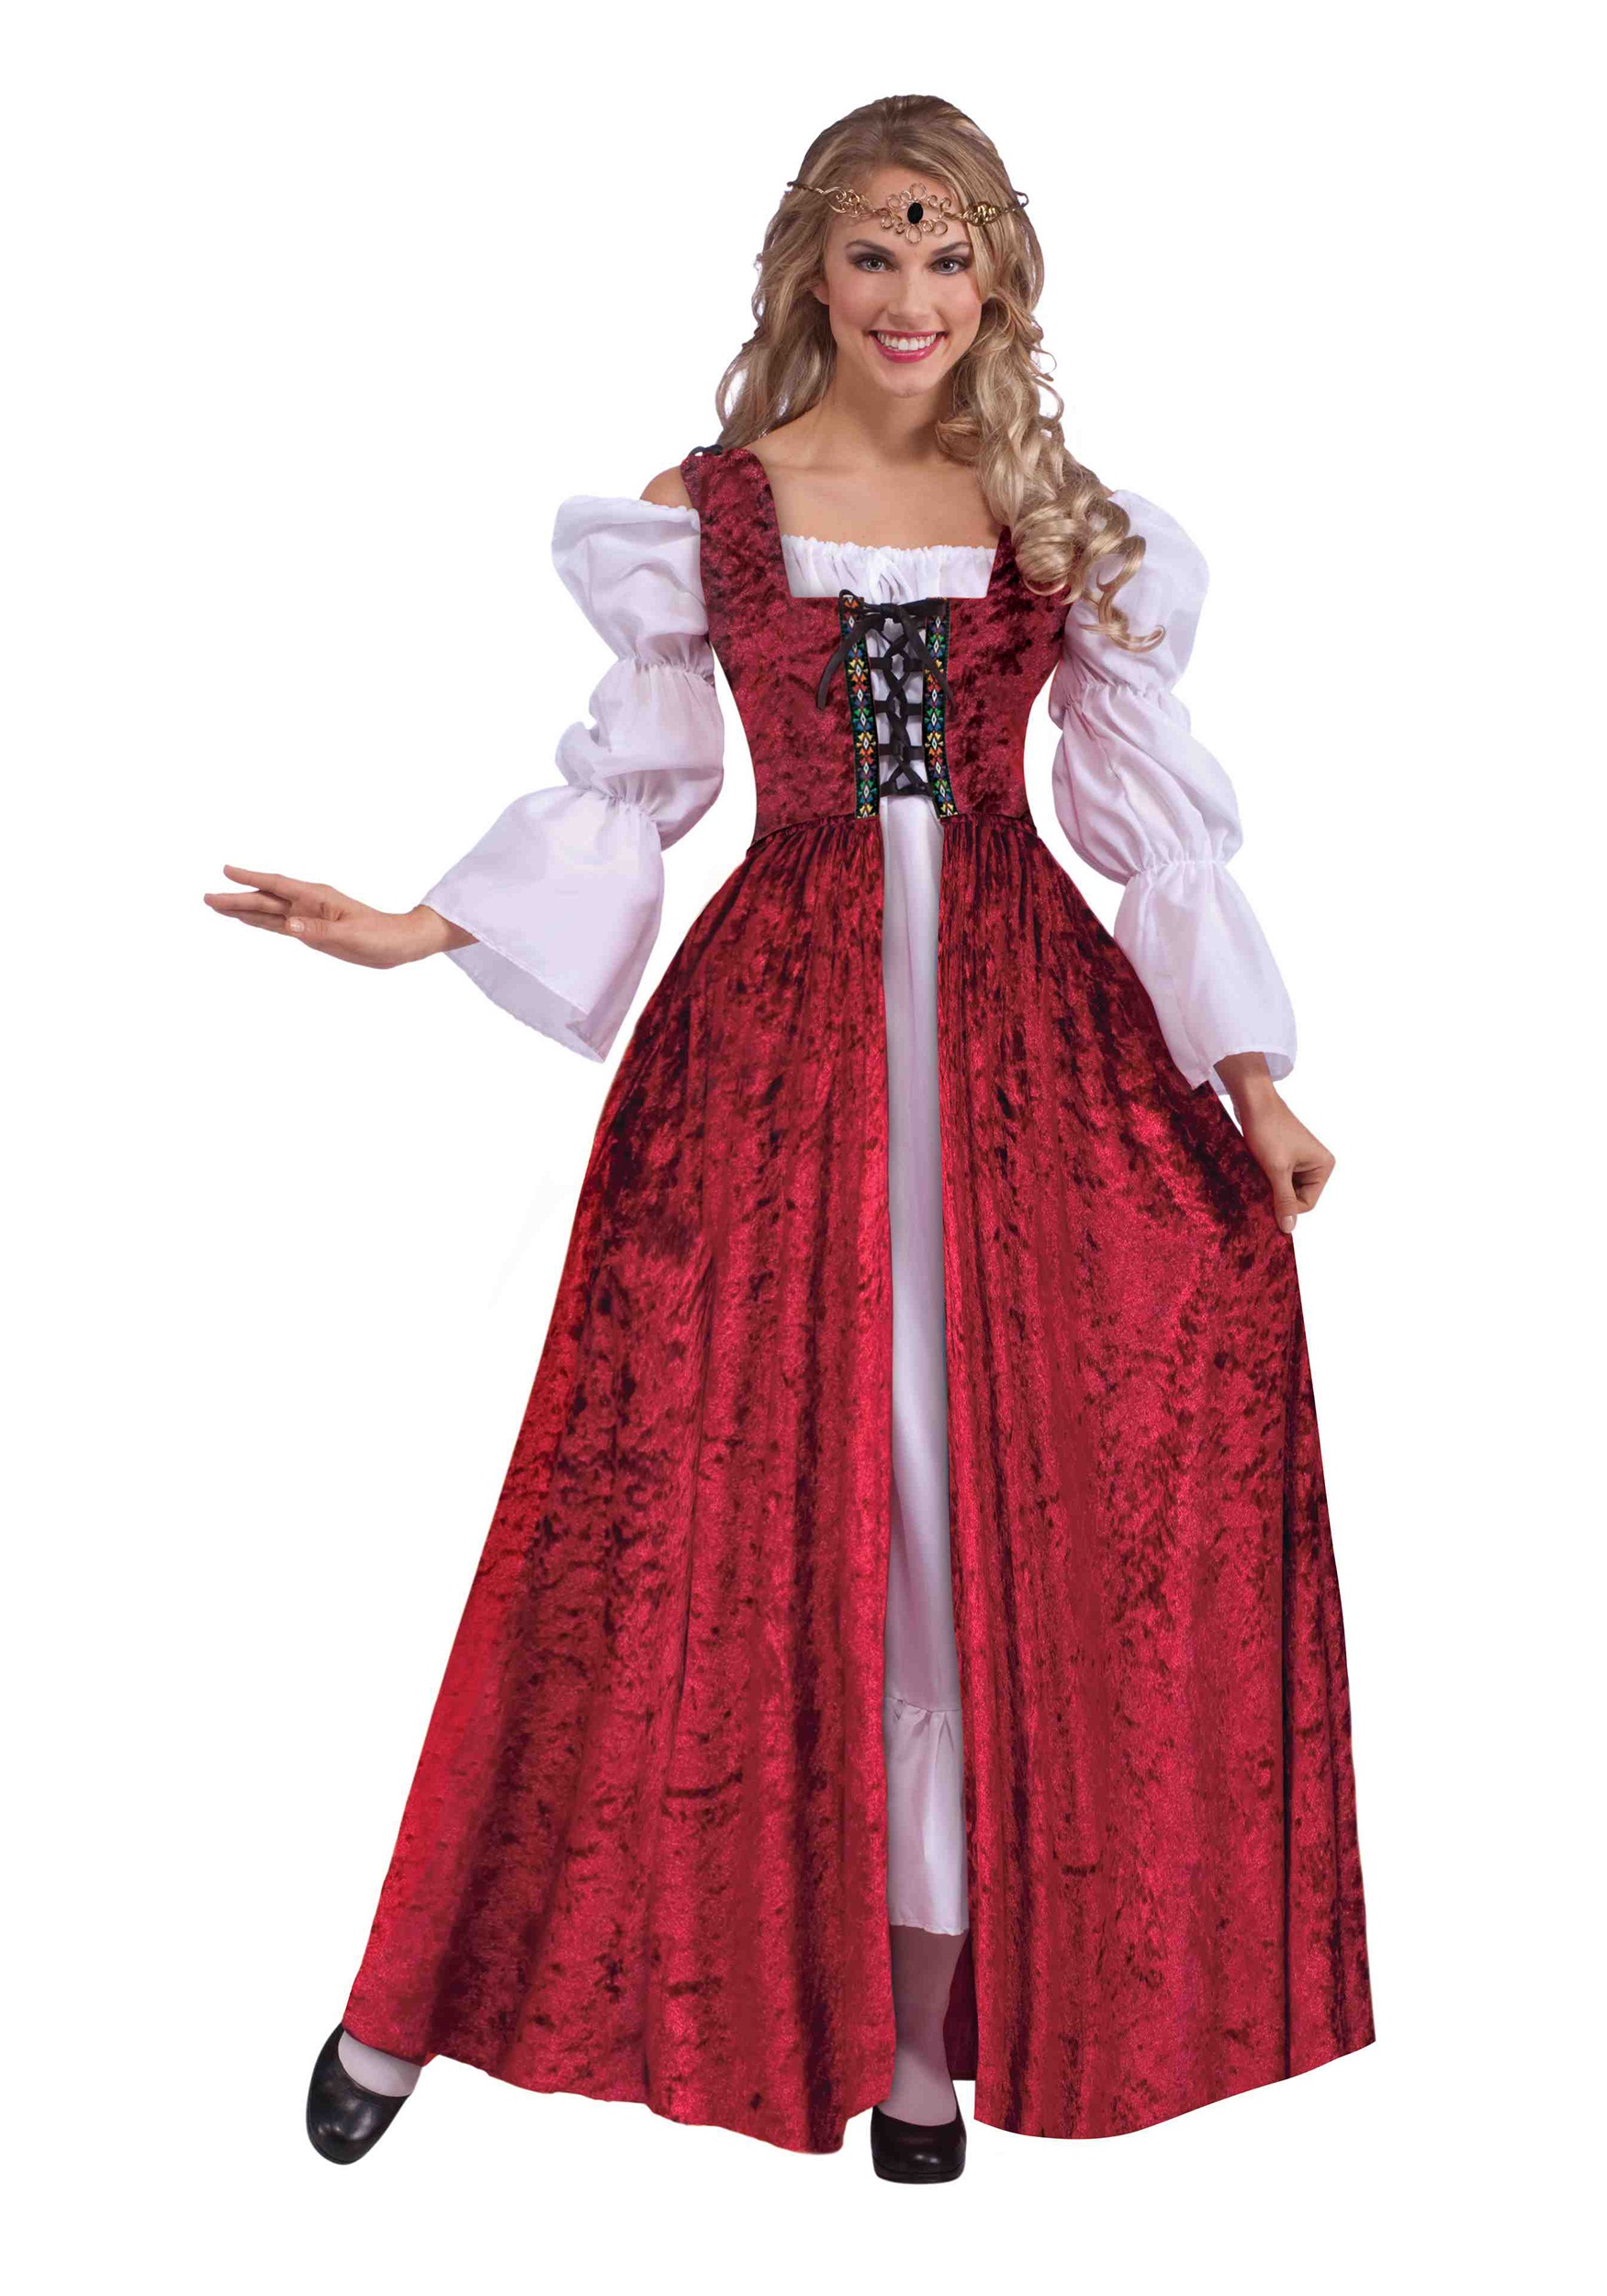 Women’s Plus Size Medieval Laced Gown Costume